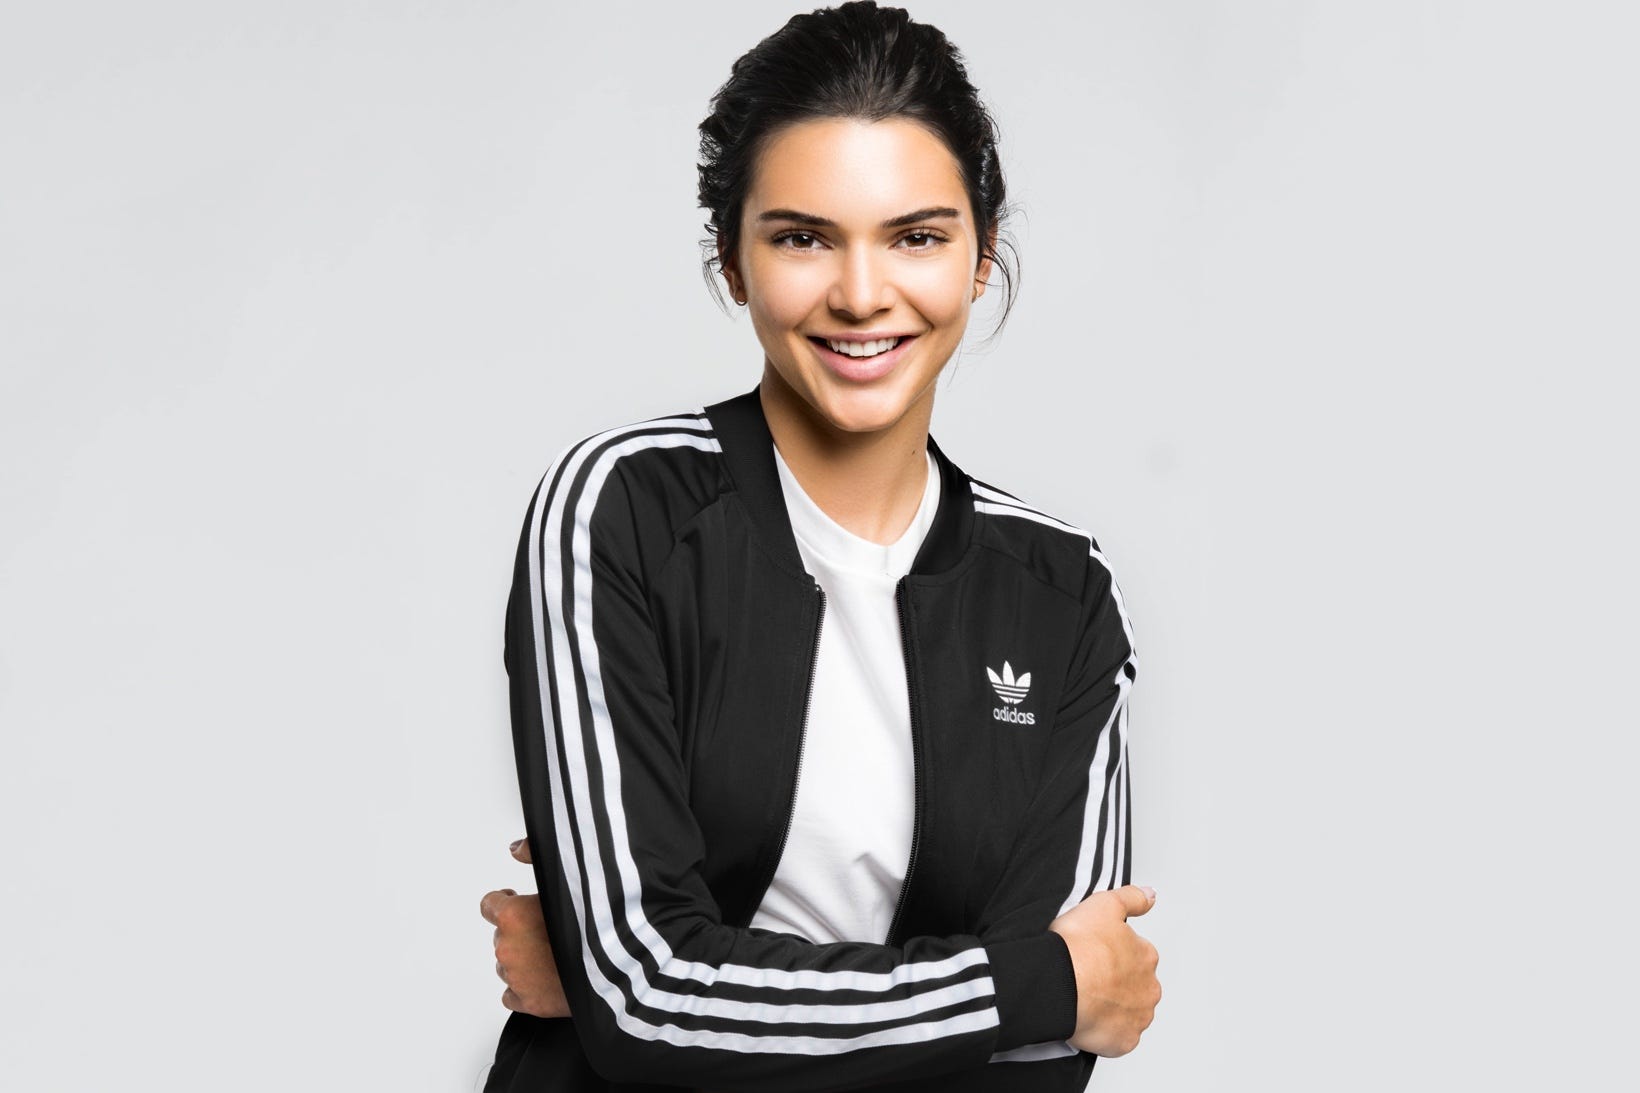 Why Kendall Jenner and Adidas Originals Are a Match Made in Sneaker Heaven